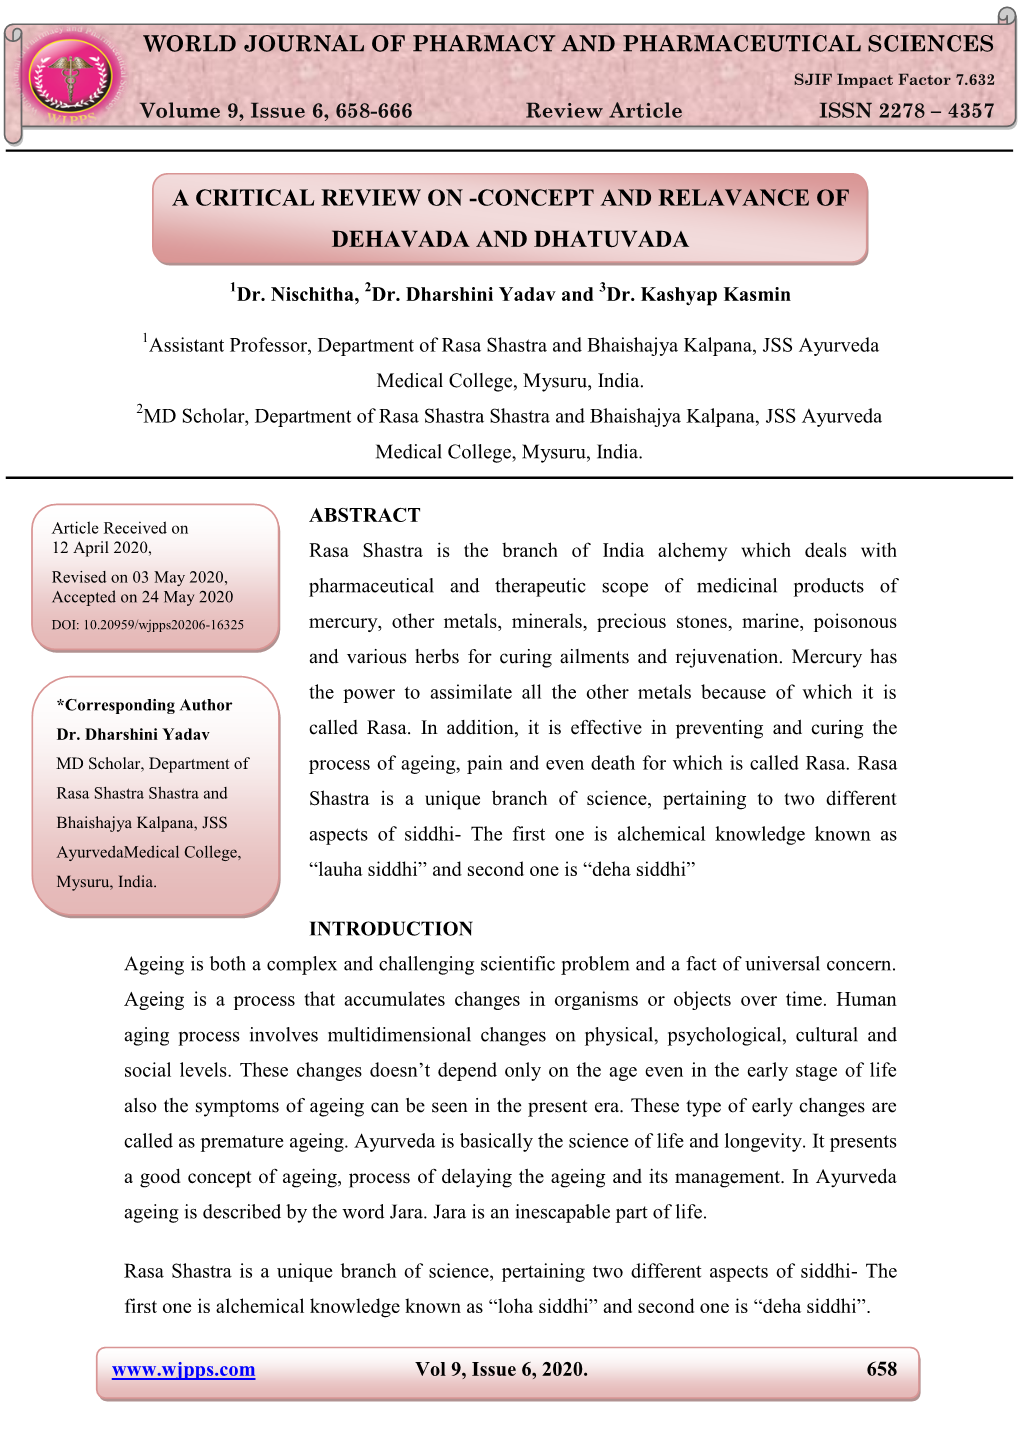 A Critical Review on -Concept and Relavance of Dehavada and Dhatuvada